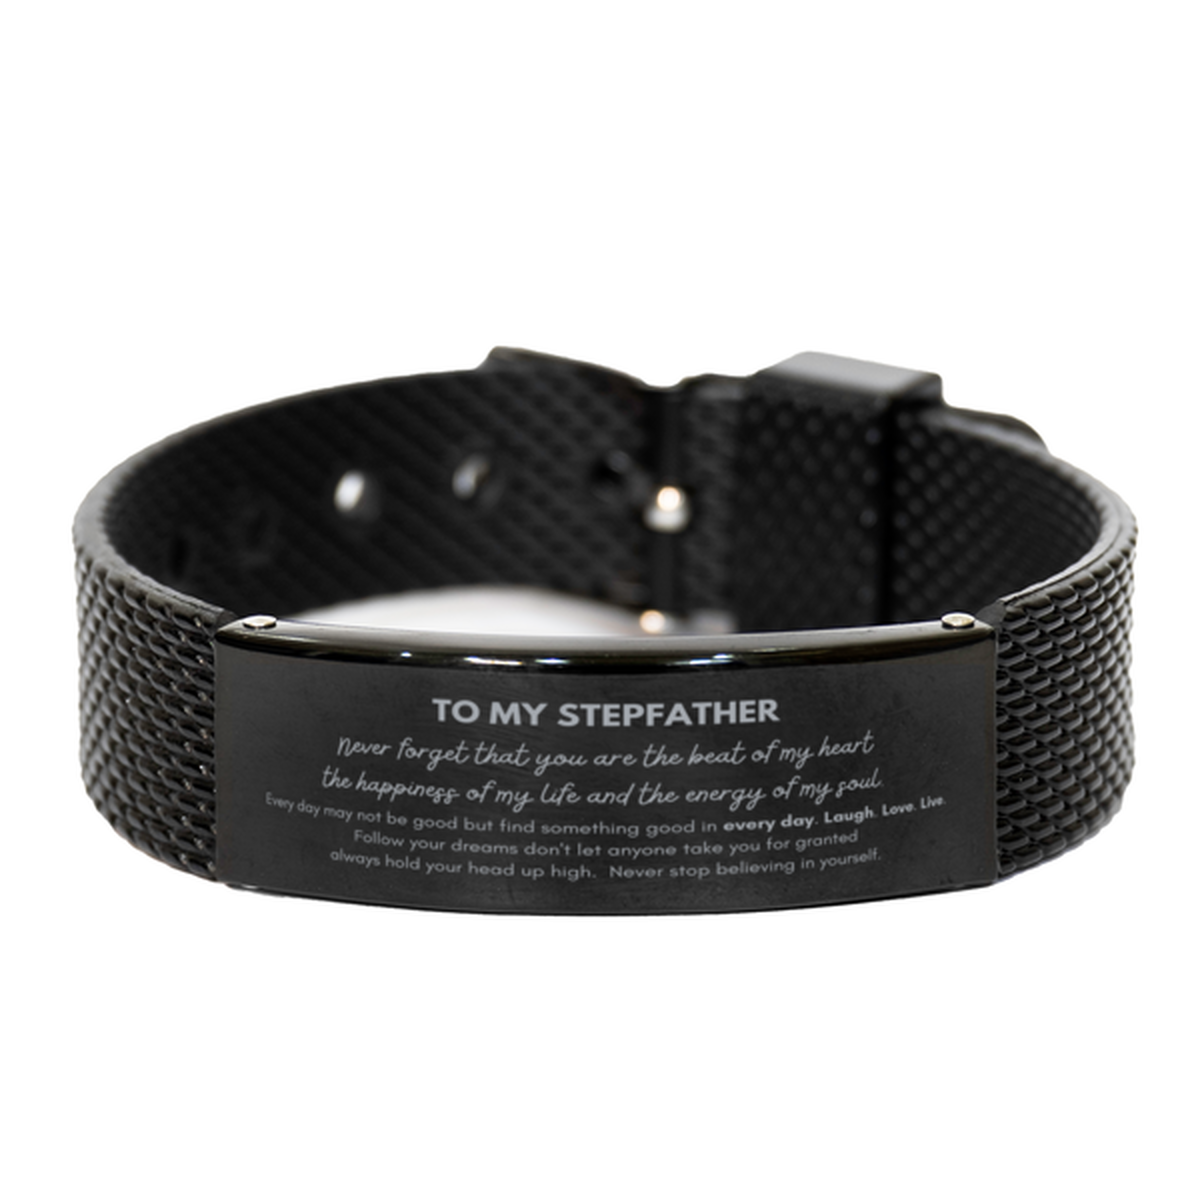 To My Stepfather Bracelet Gifts, Christmas Stepfather Black Shark Mesh Bracelet Present, Birthday Unique Motivational For Stepfather, To My Stepfather Never forget that you are the beat of my heart the happiness of my life and the energy of my soul